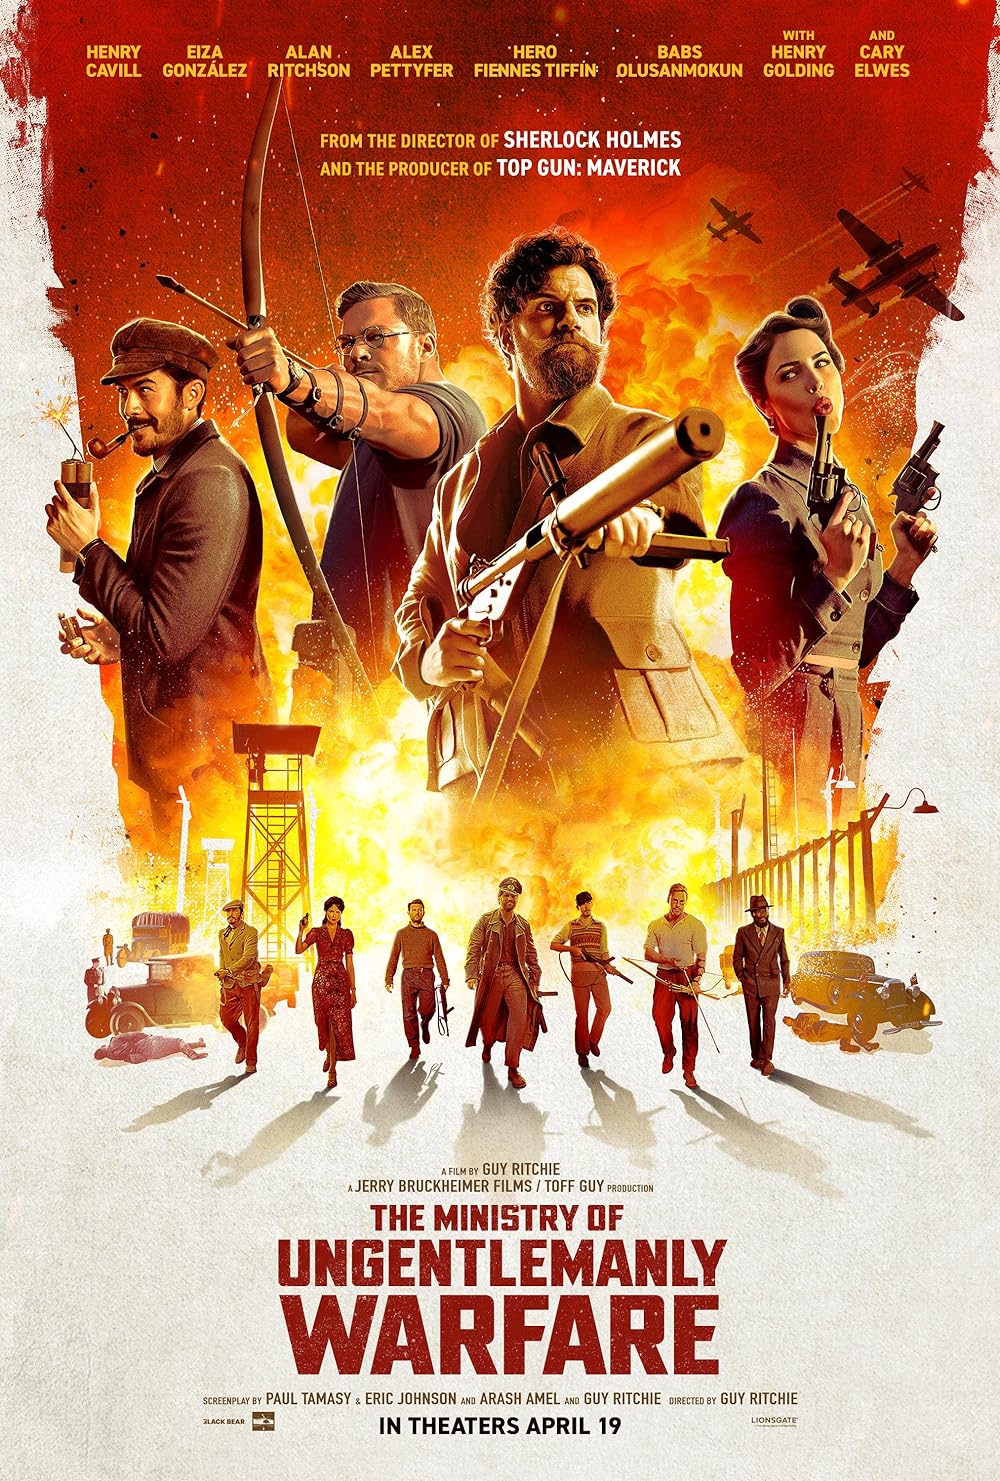 Movie Poster: The Ministry of Ungentlemanly Warfare